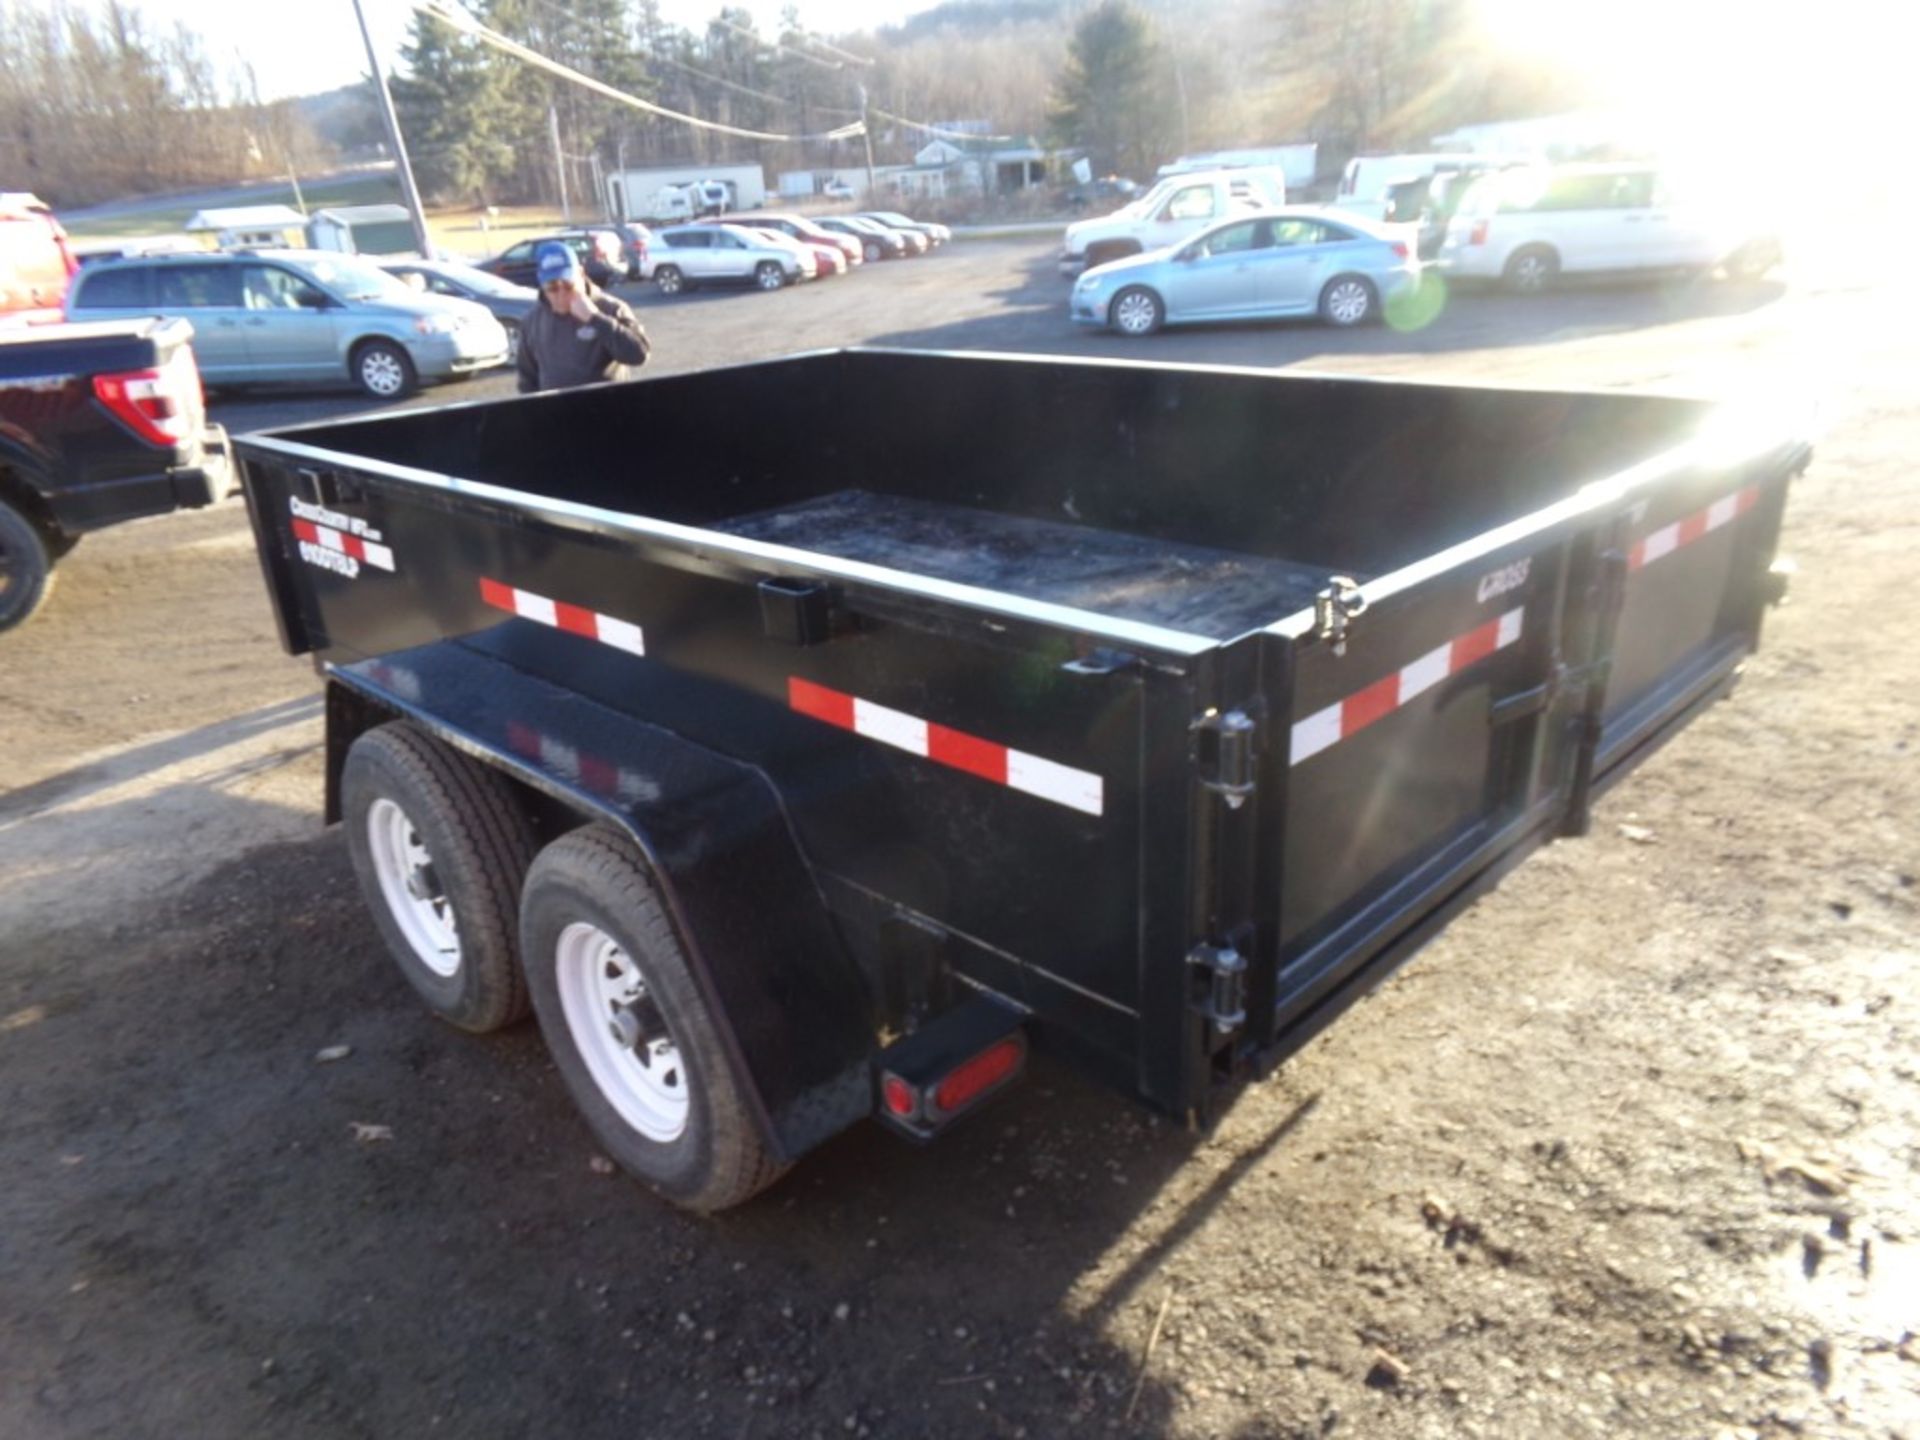 2024 Cross Country New 610DT8LP Tandem Axle Dump Trailer, Black, Swing Out Doors, Galvanized Ramps - Image 3 of 4